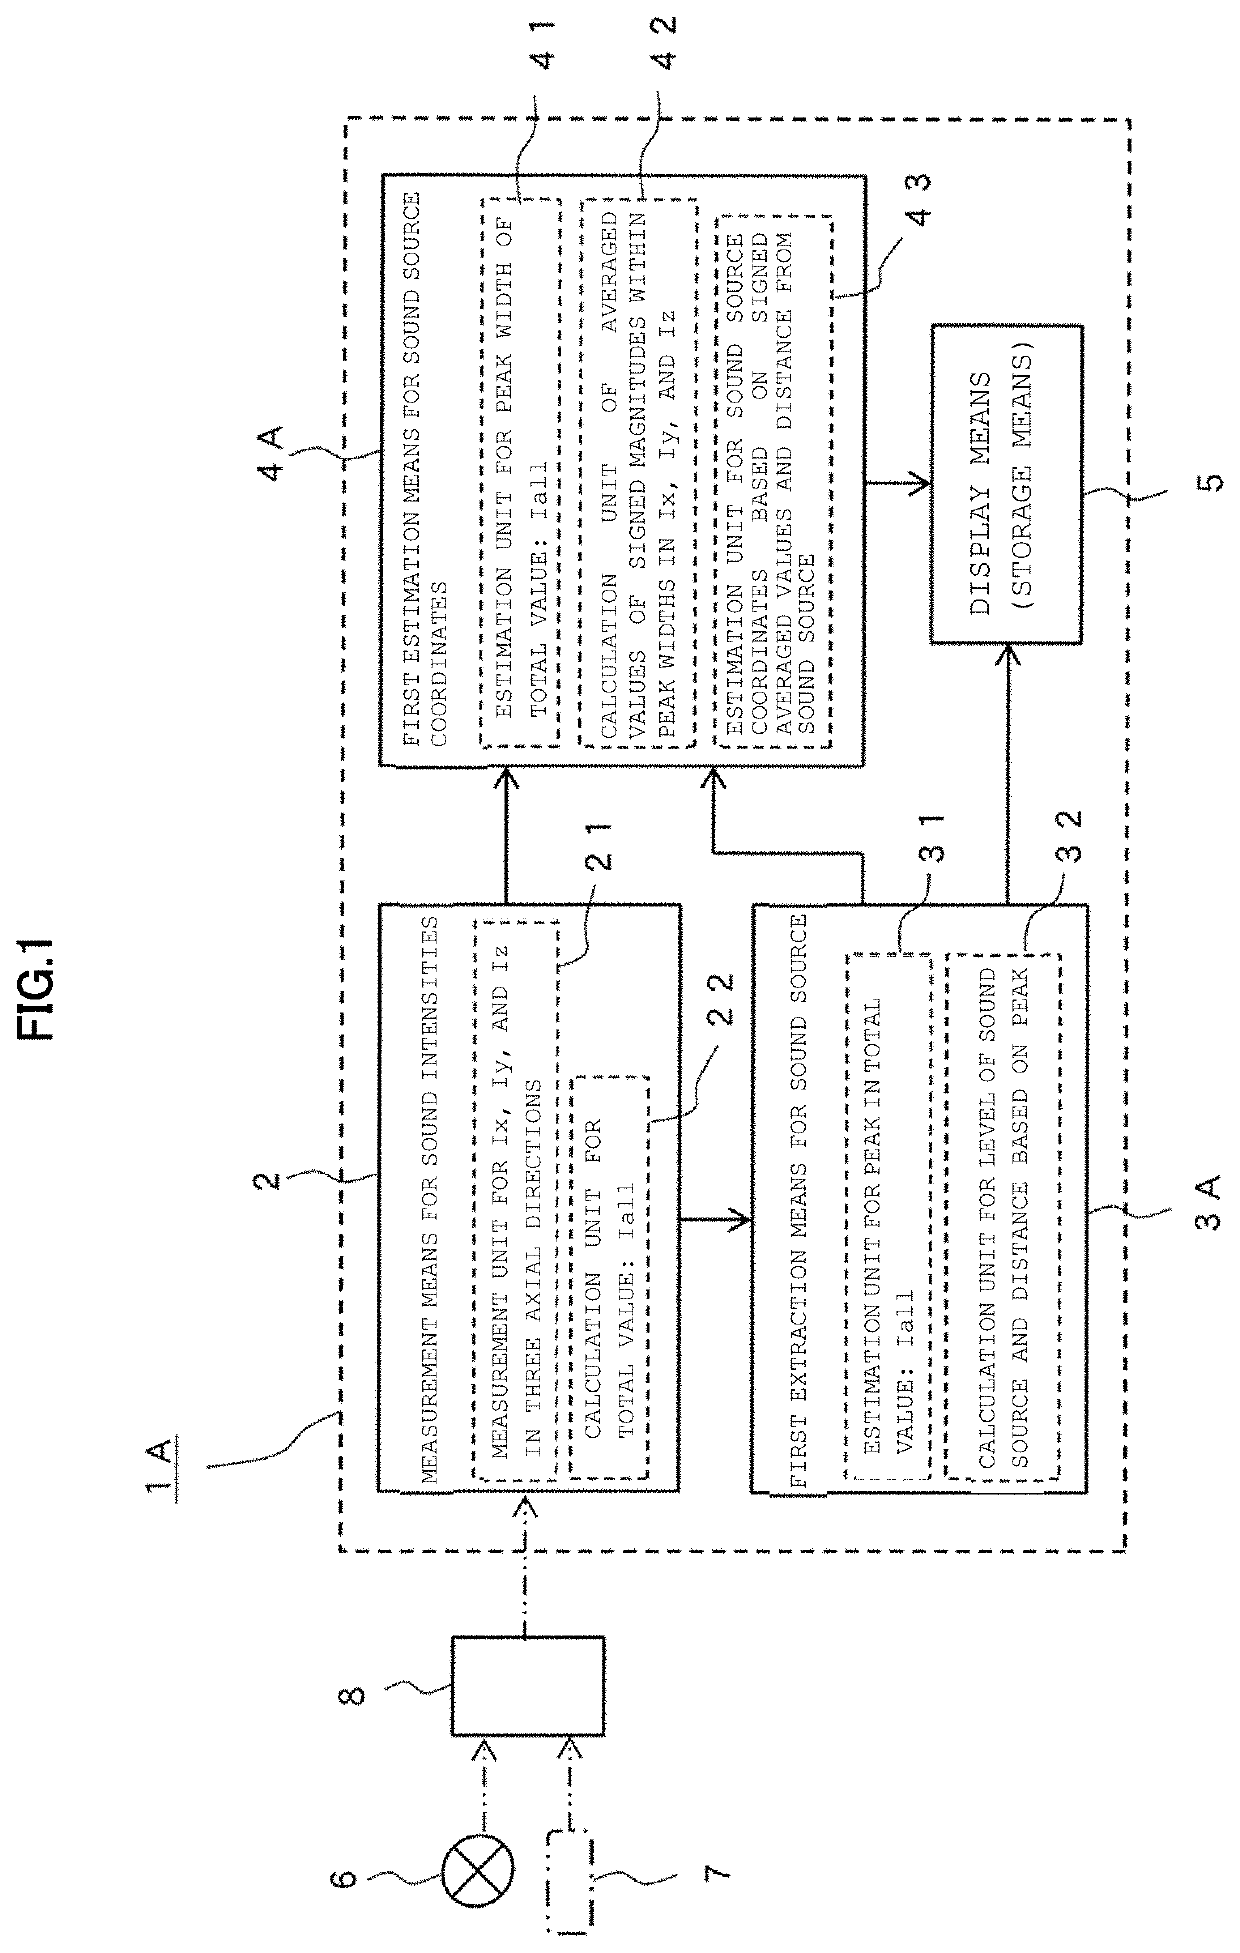 Sound source detecting method and detecting device